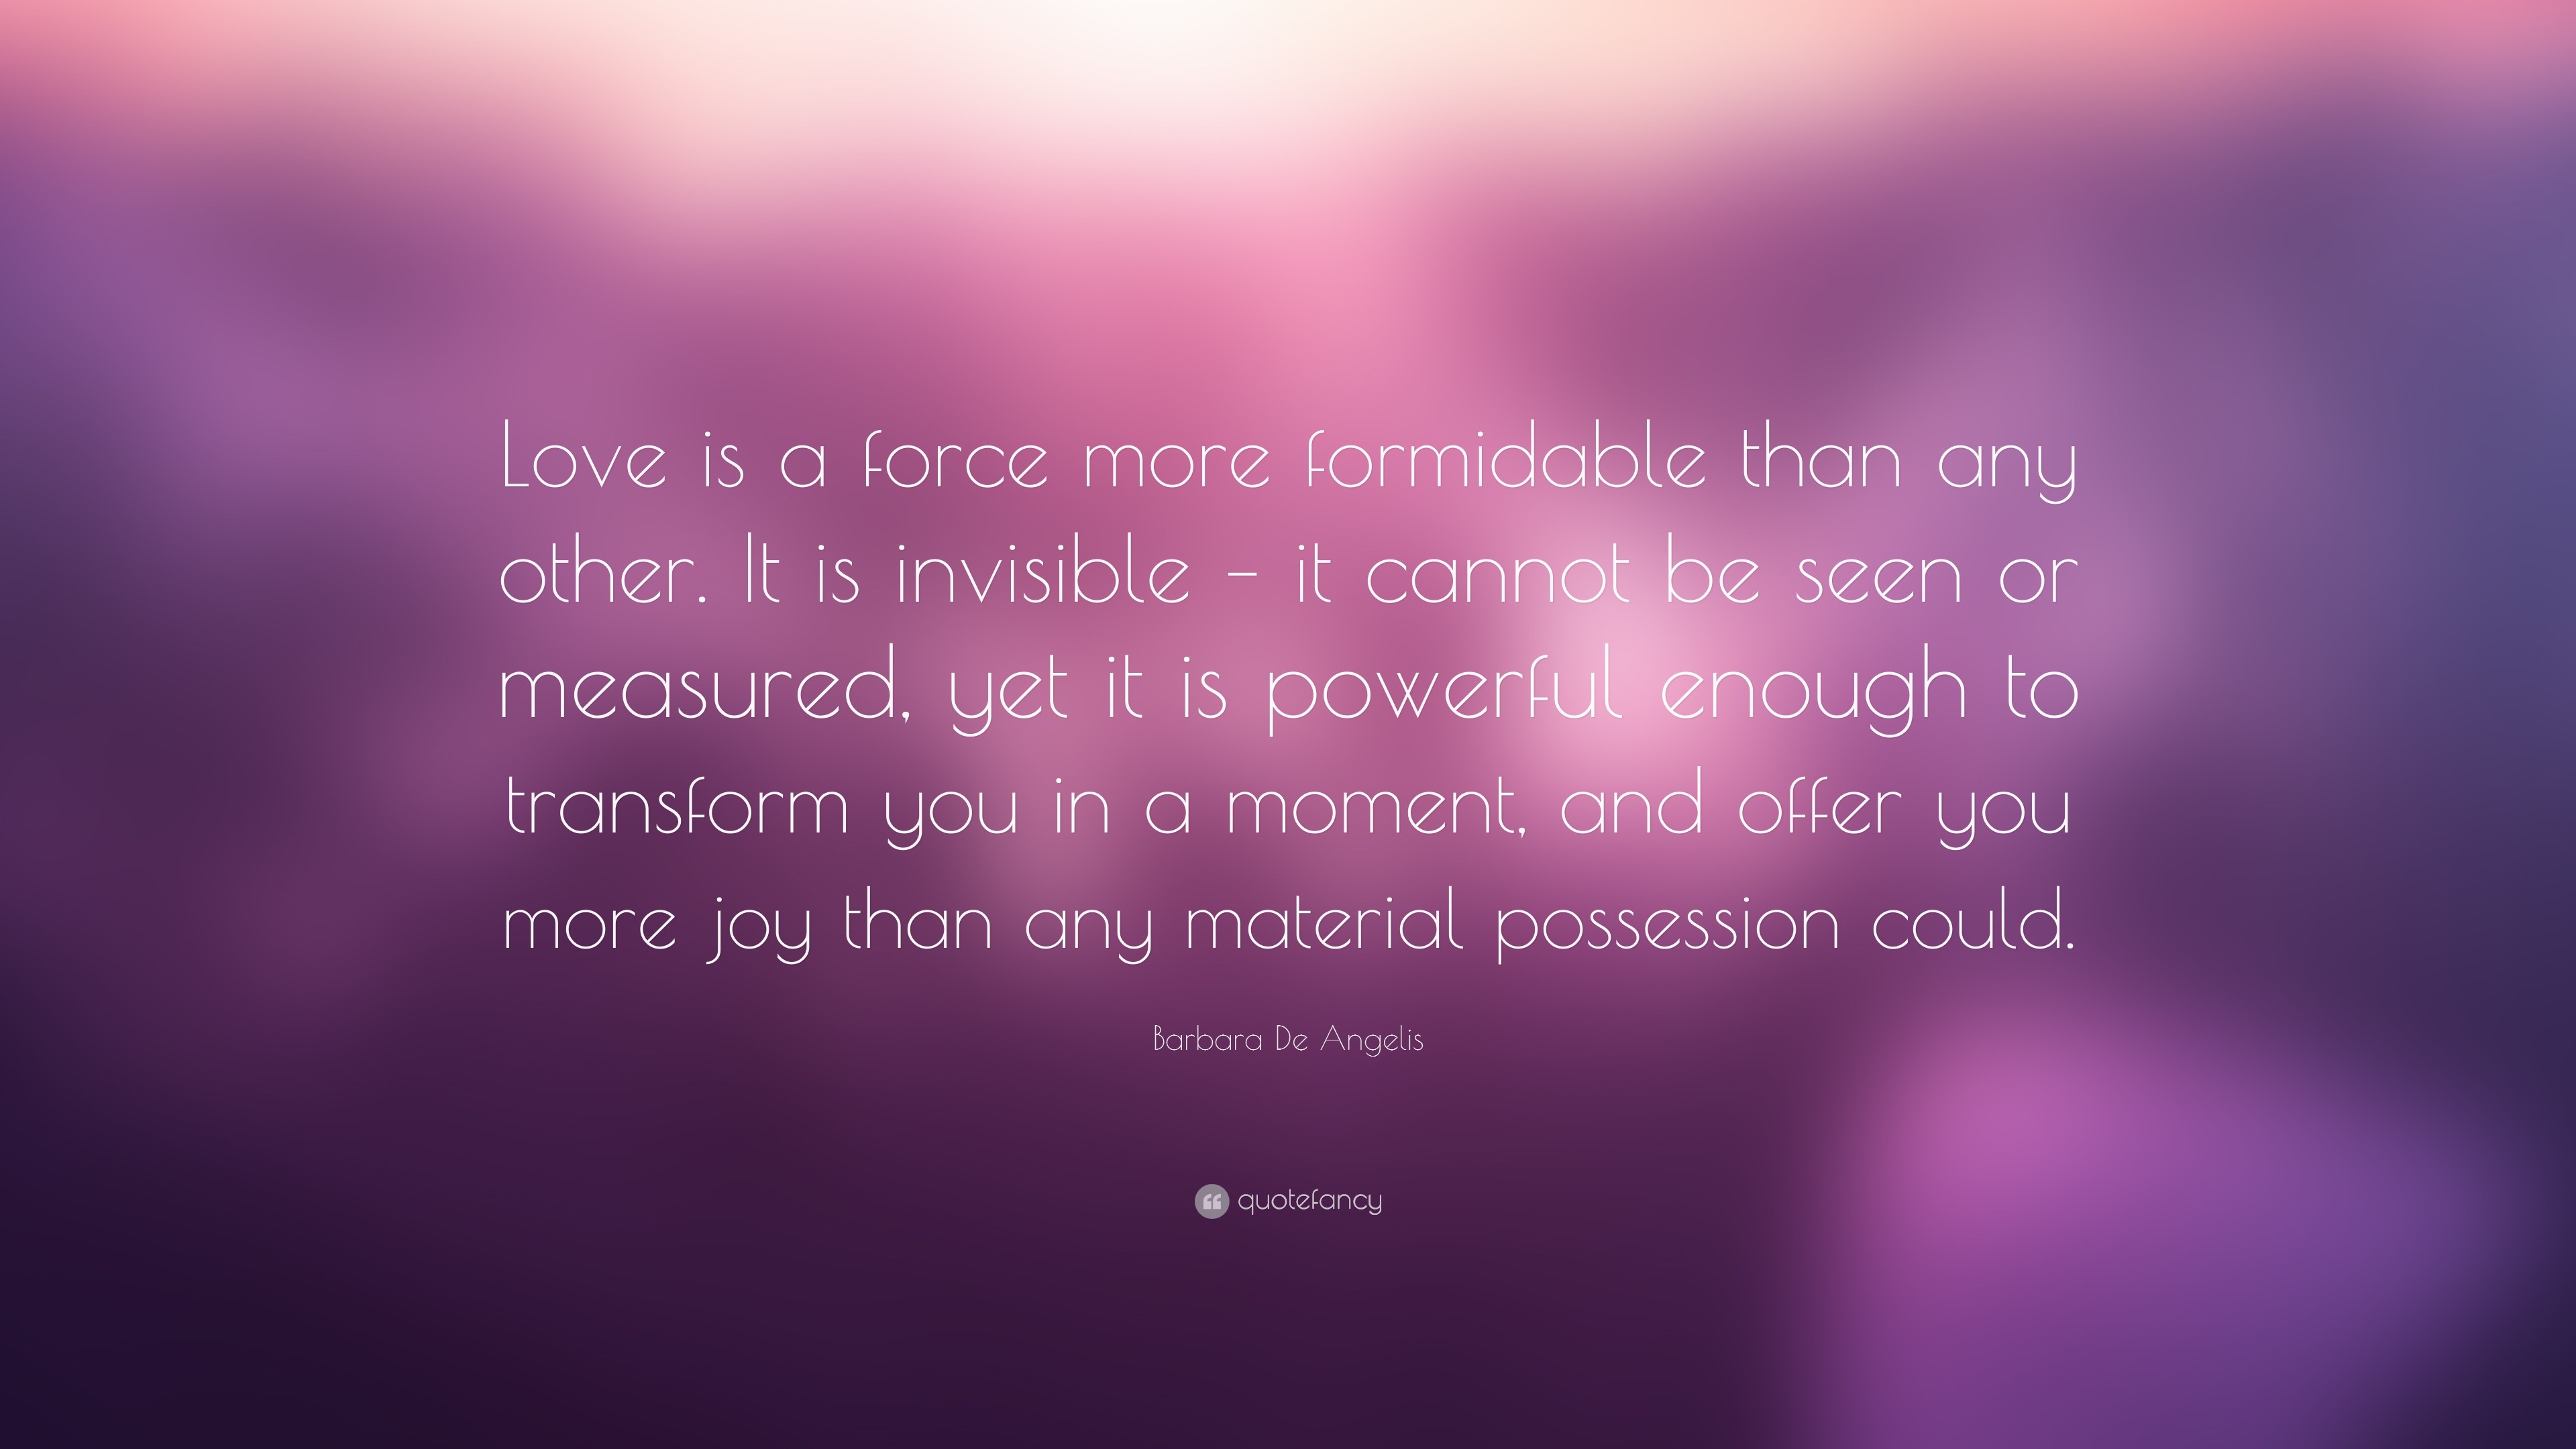 Barbara De Angelis Quote: “Love is a force more formidable than any ...